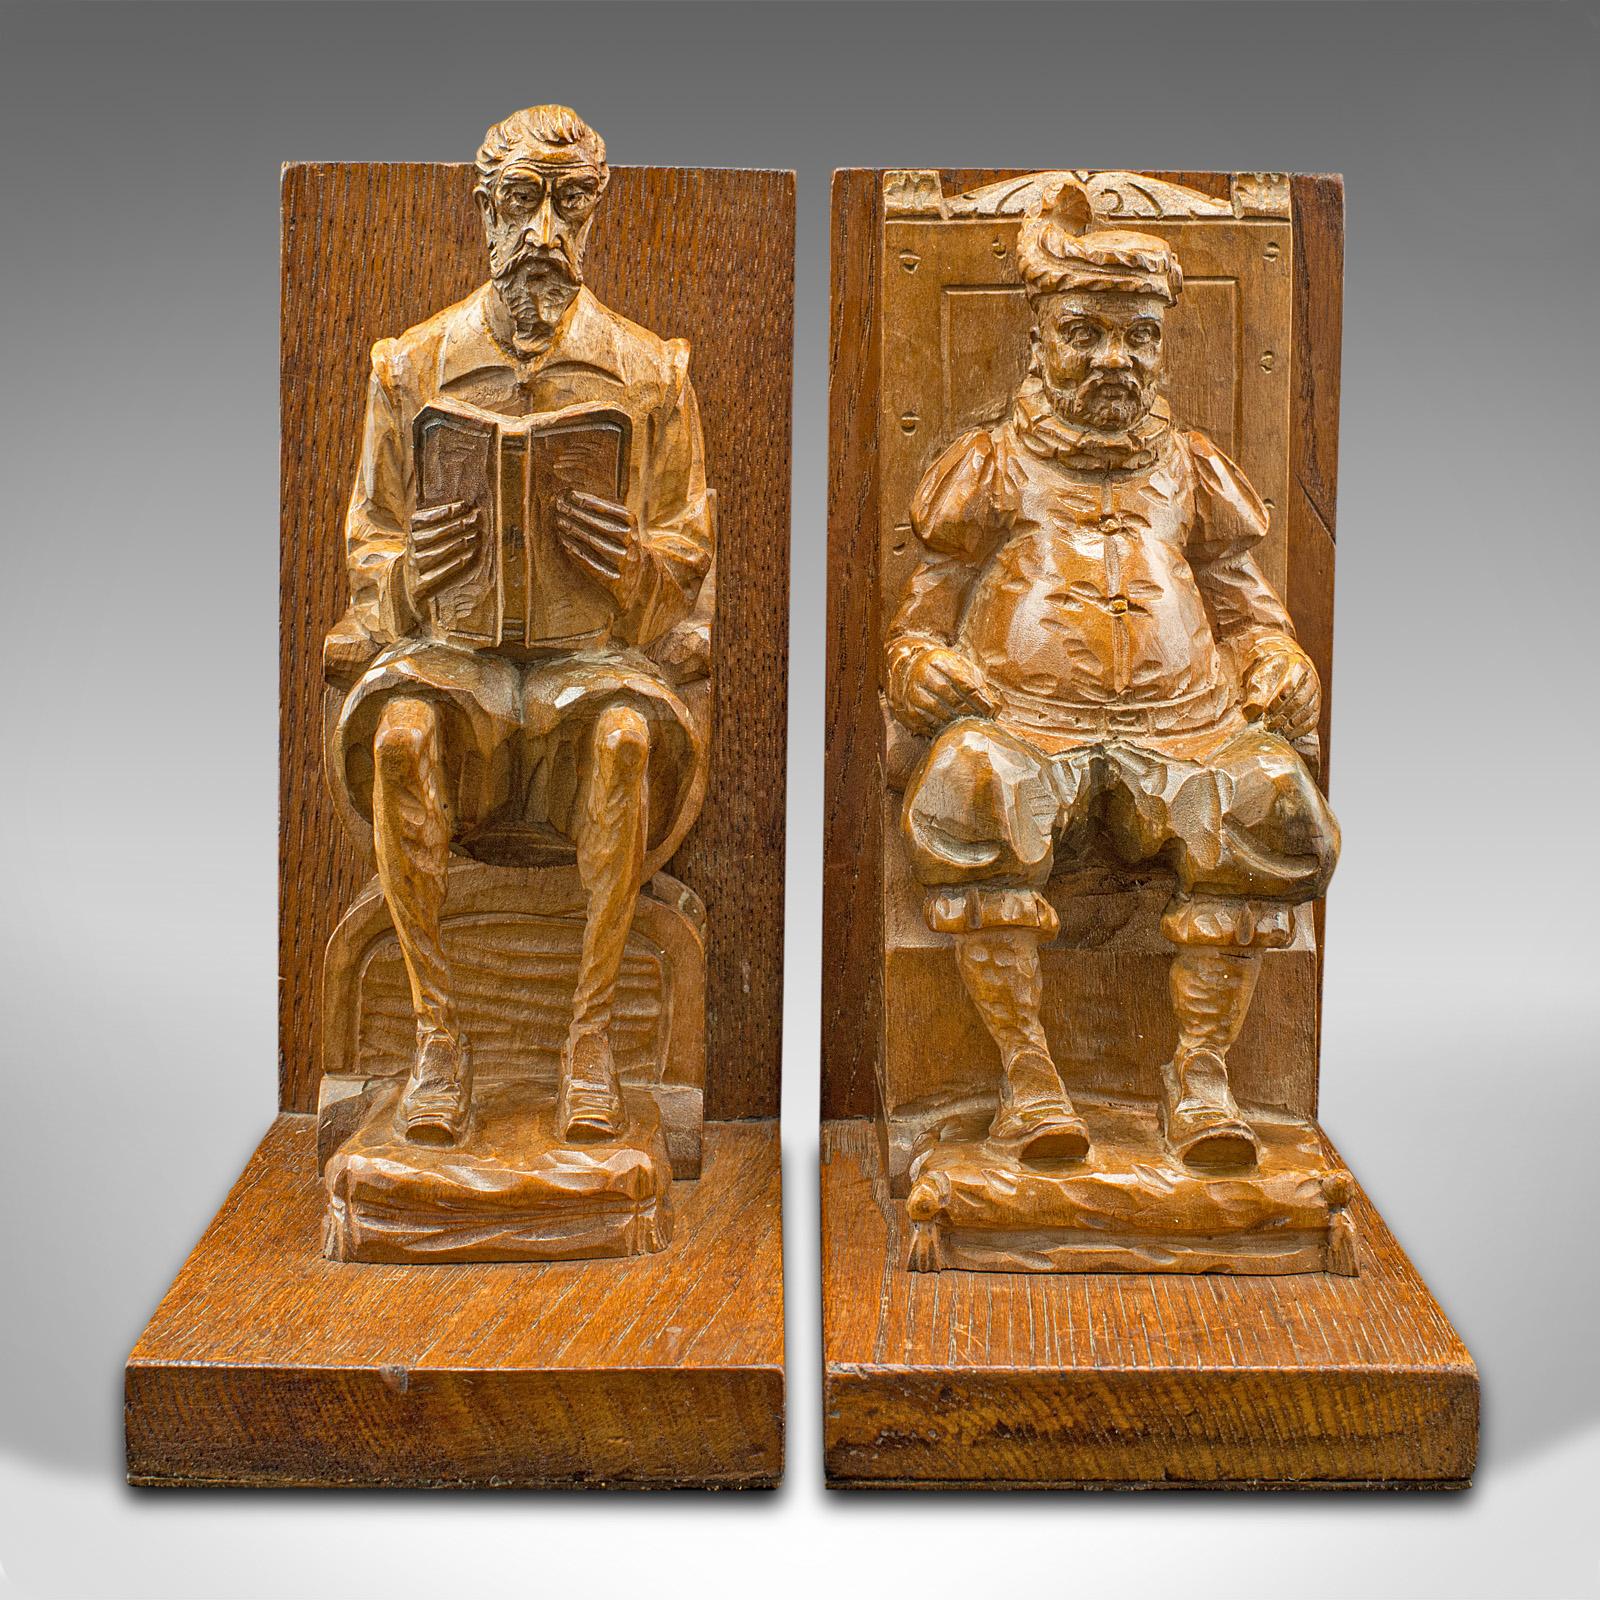 20th Century Pair Of Vintage Character Bookends, Spanish, Hand Carved, Book Rest, Don Quixote